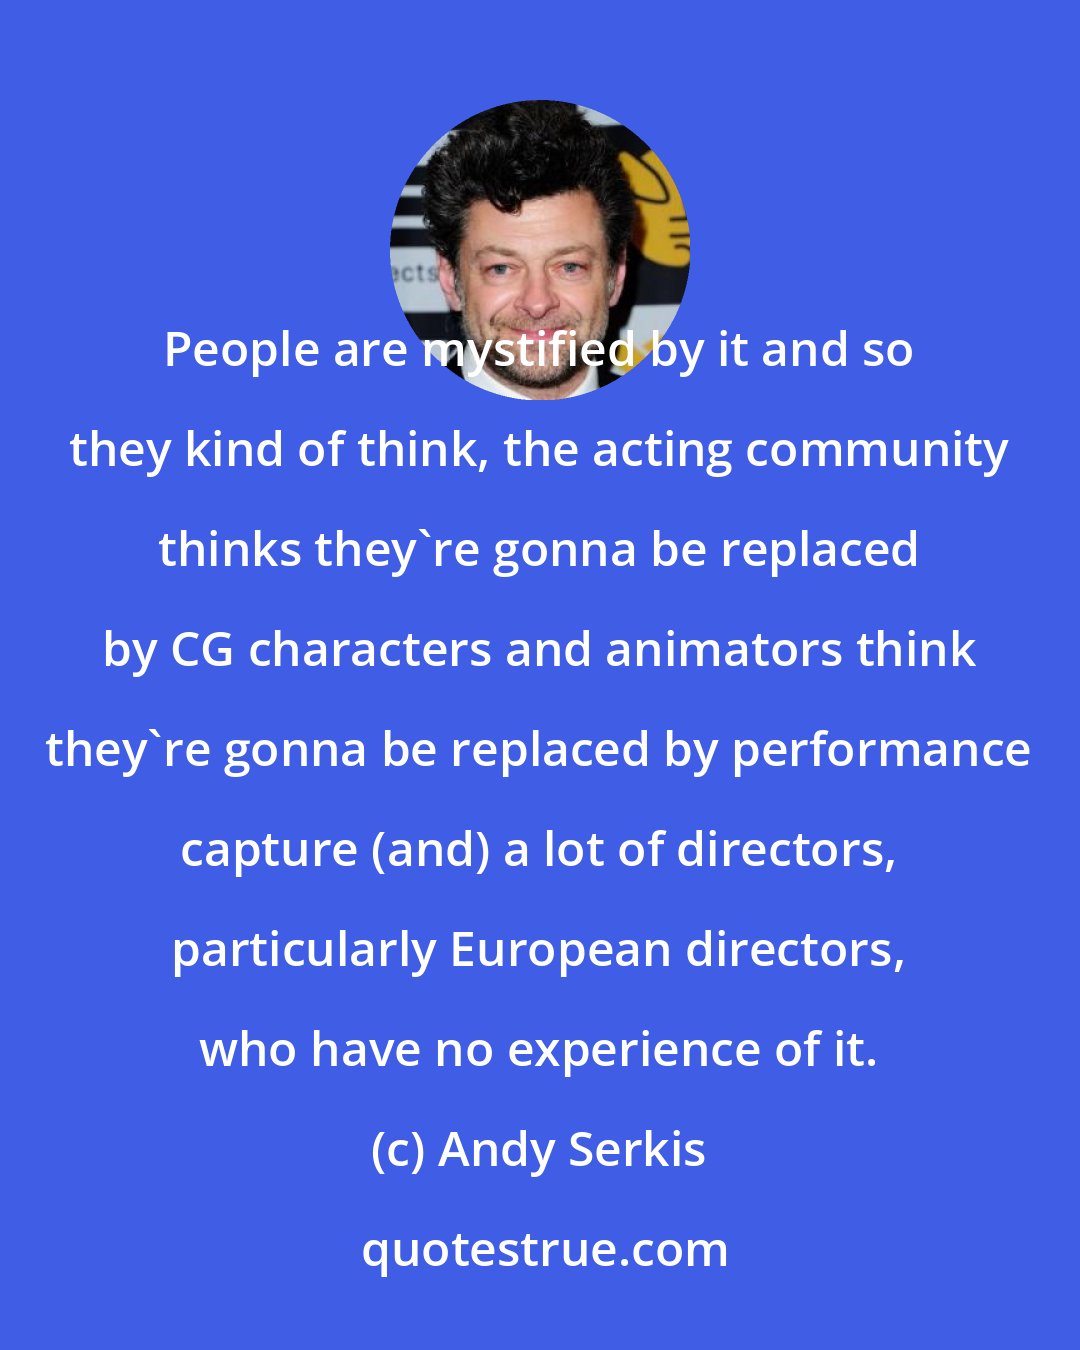 Andy Serkis: People are mystified by it and so they kind of think, the acting community thinks they're gonna be replaced by CG characters and animators think they're gonna be replaced by performance capture (and) a lot of directors, particularly European directors, who have no experience of it.